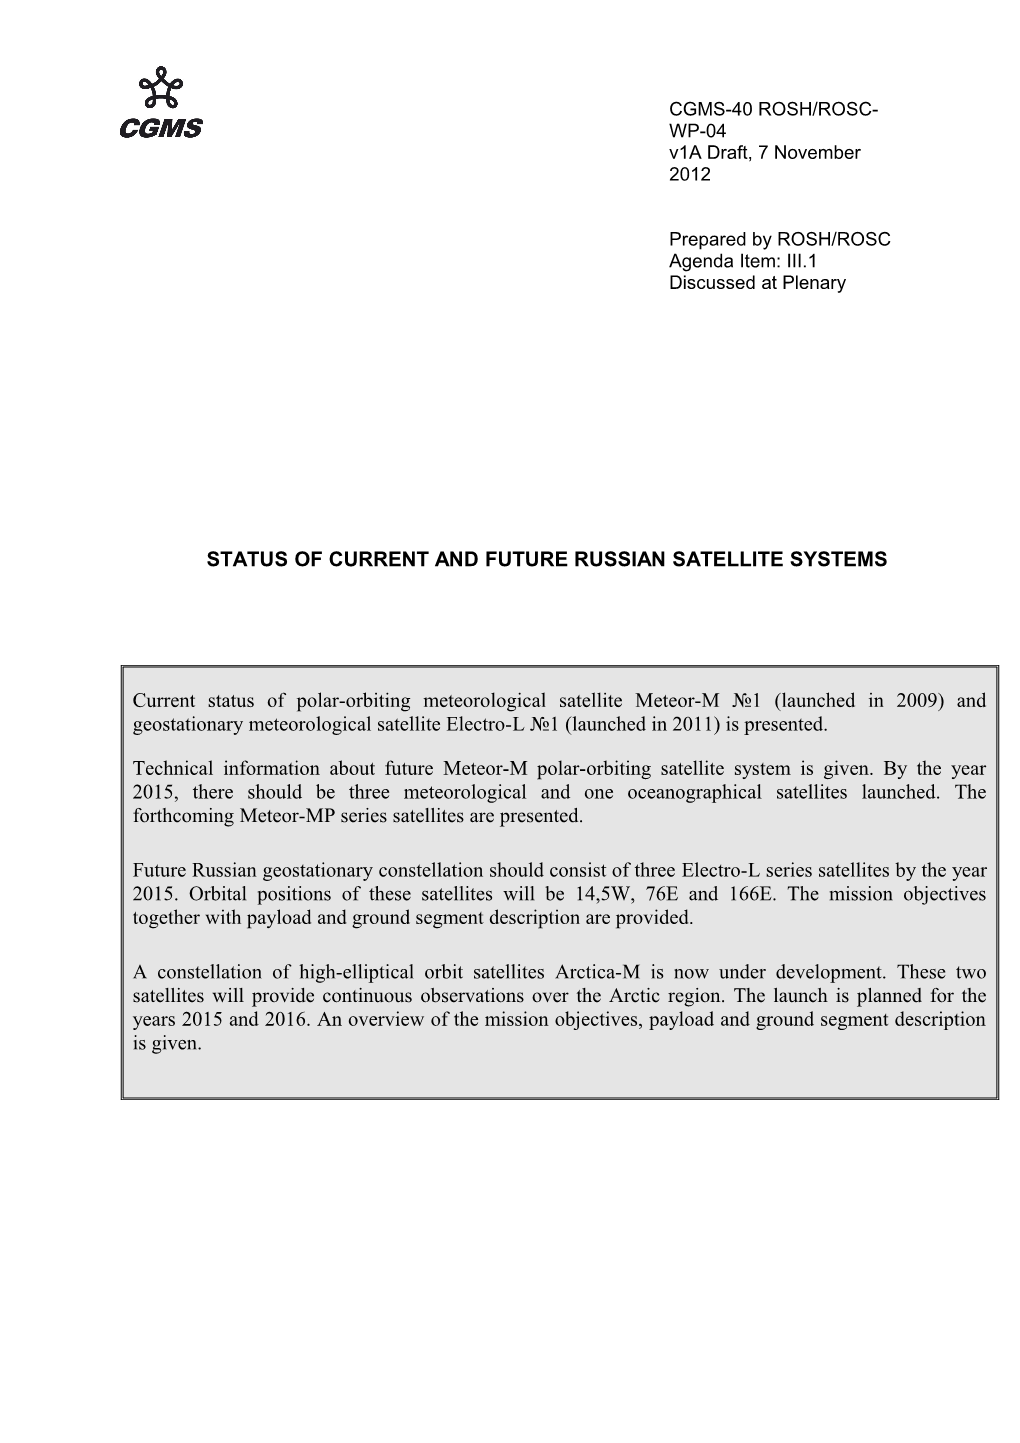 Status of Current and Future RUSSIAN Satellite Systems